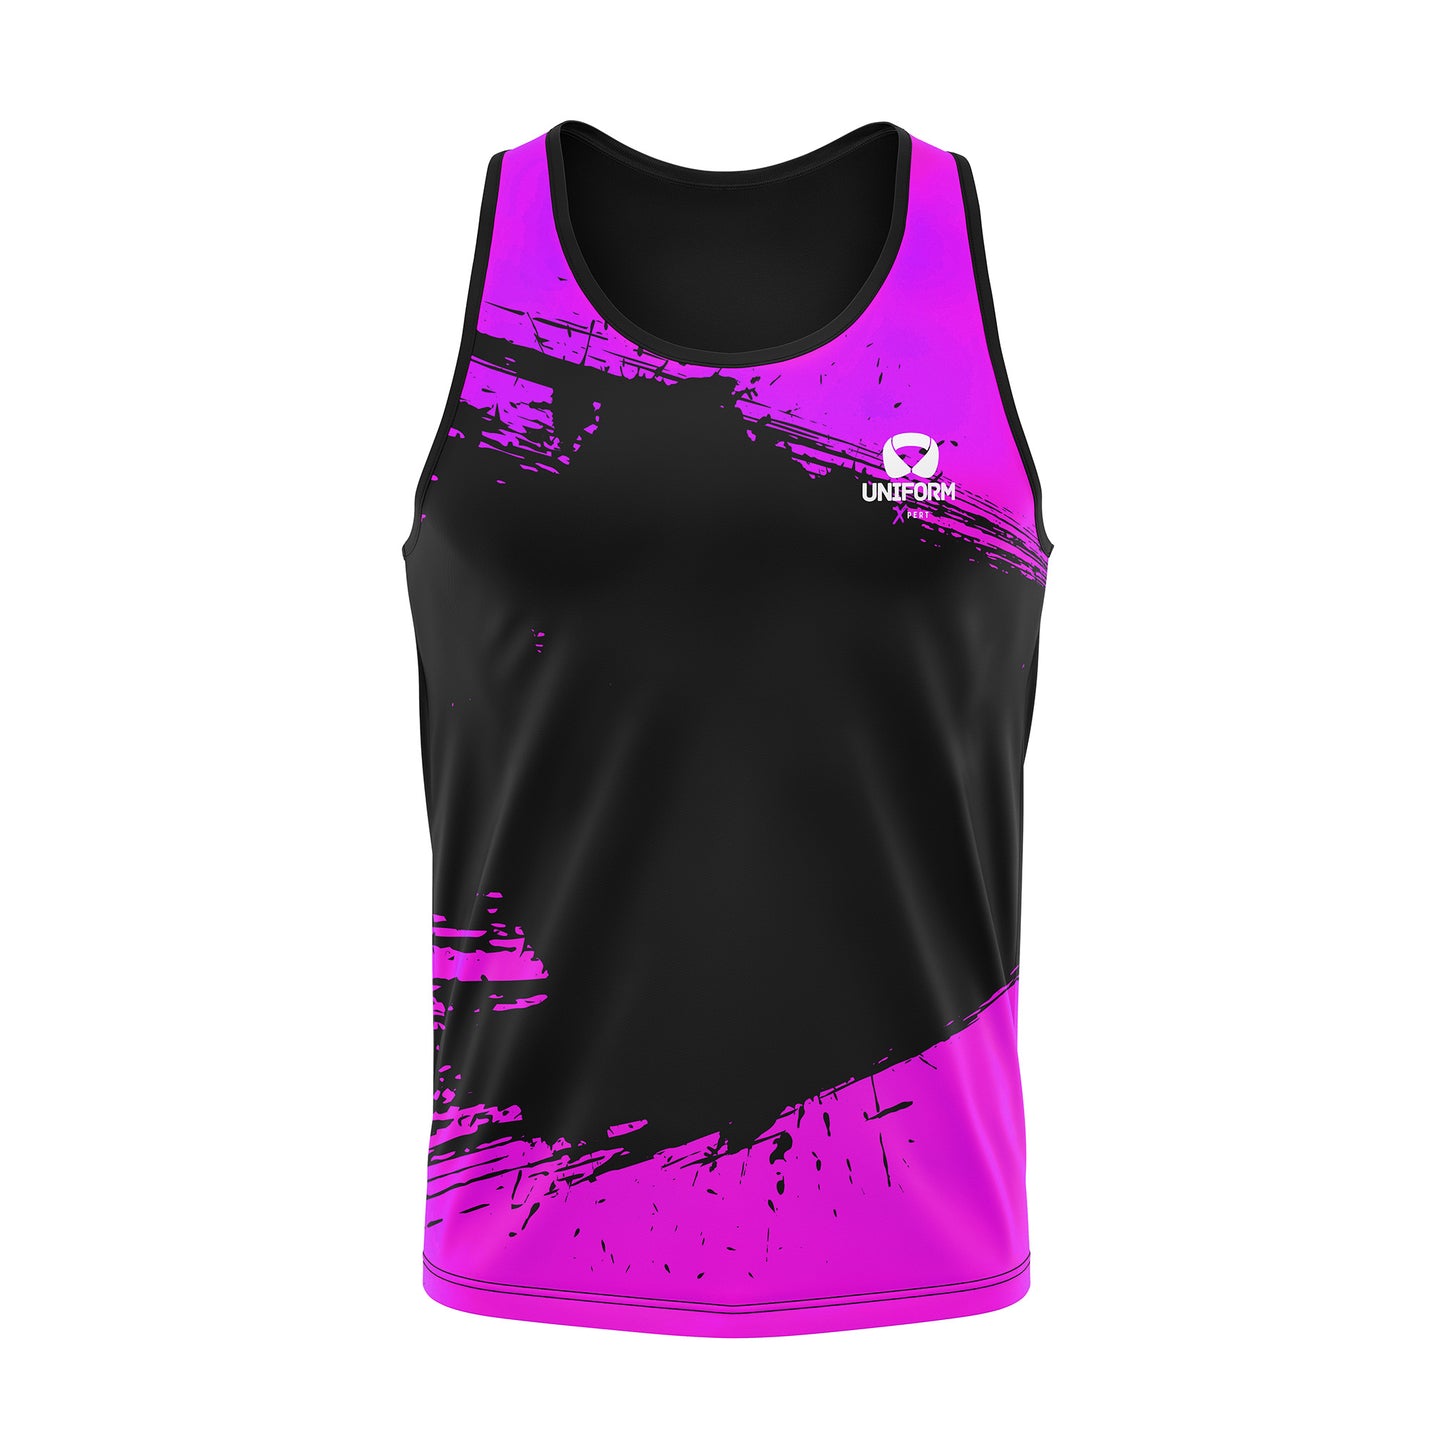 Custom Tank Tops | Tailored Sportswear for Active Living